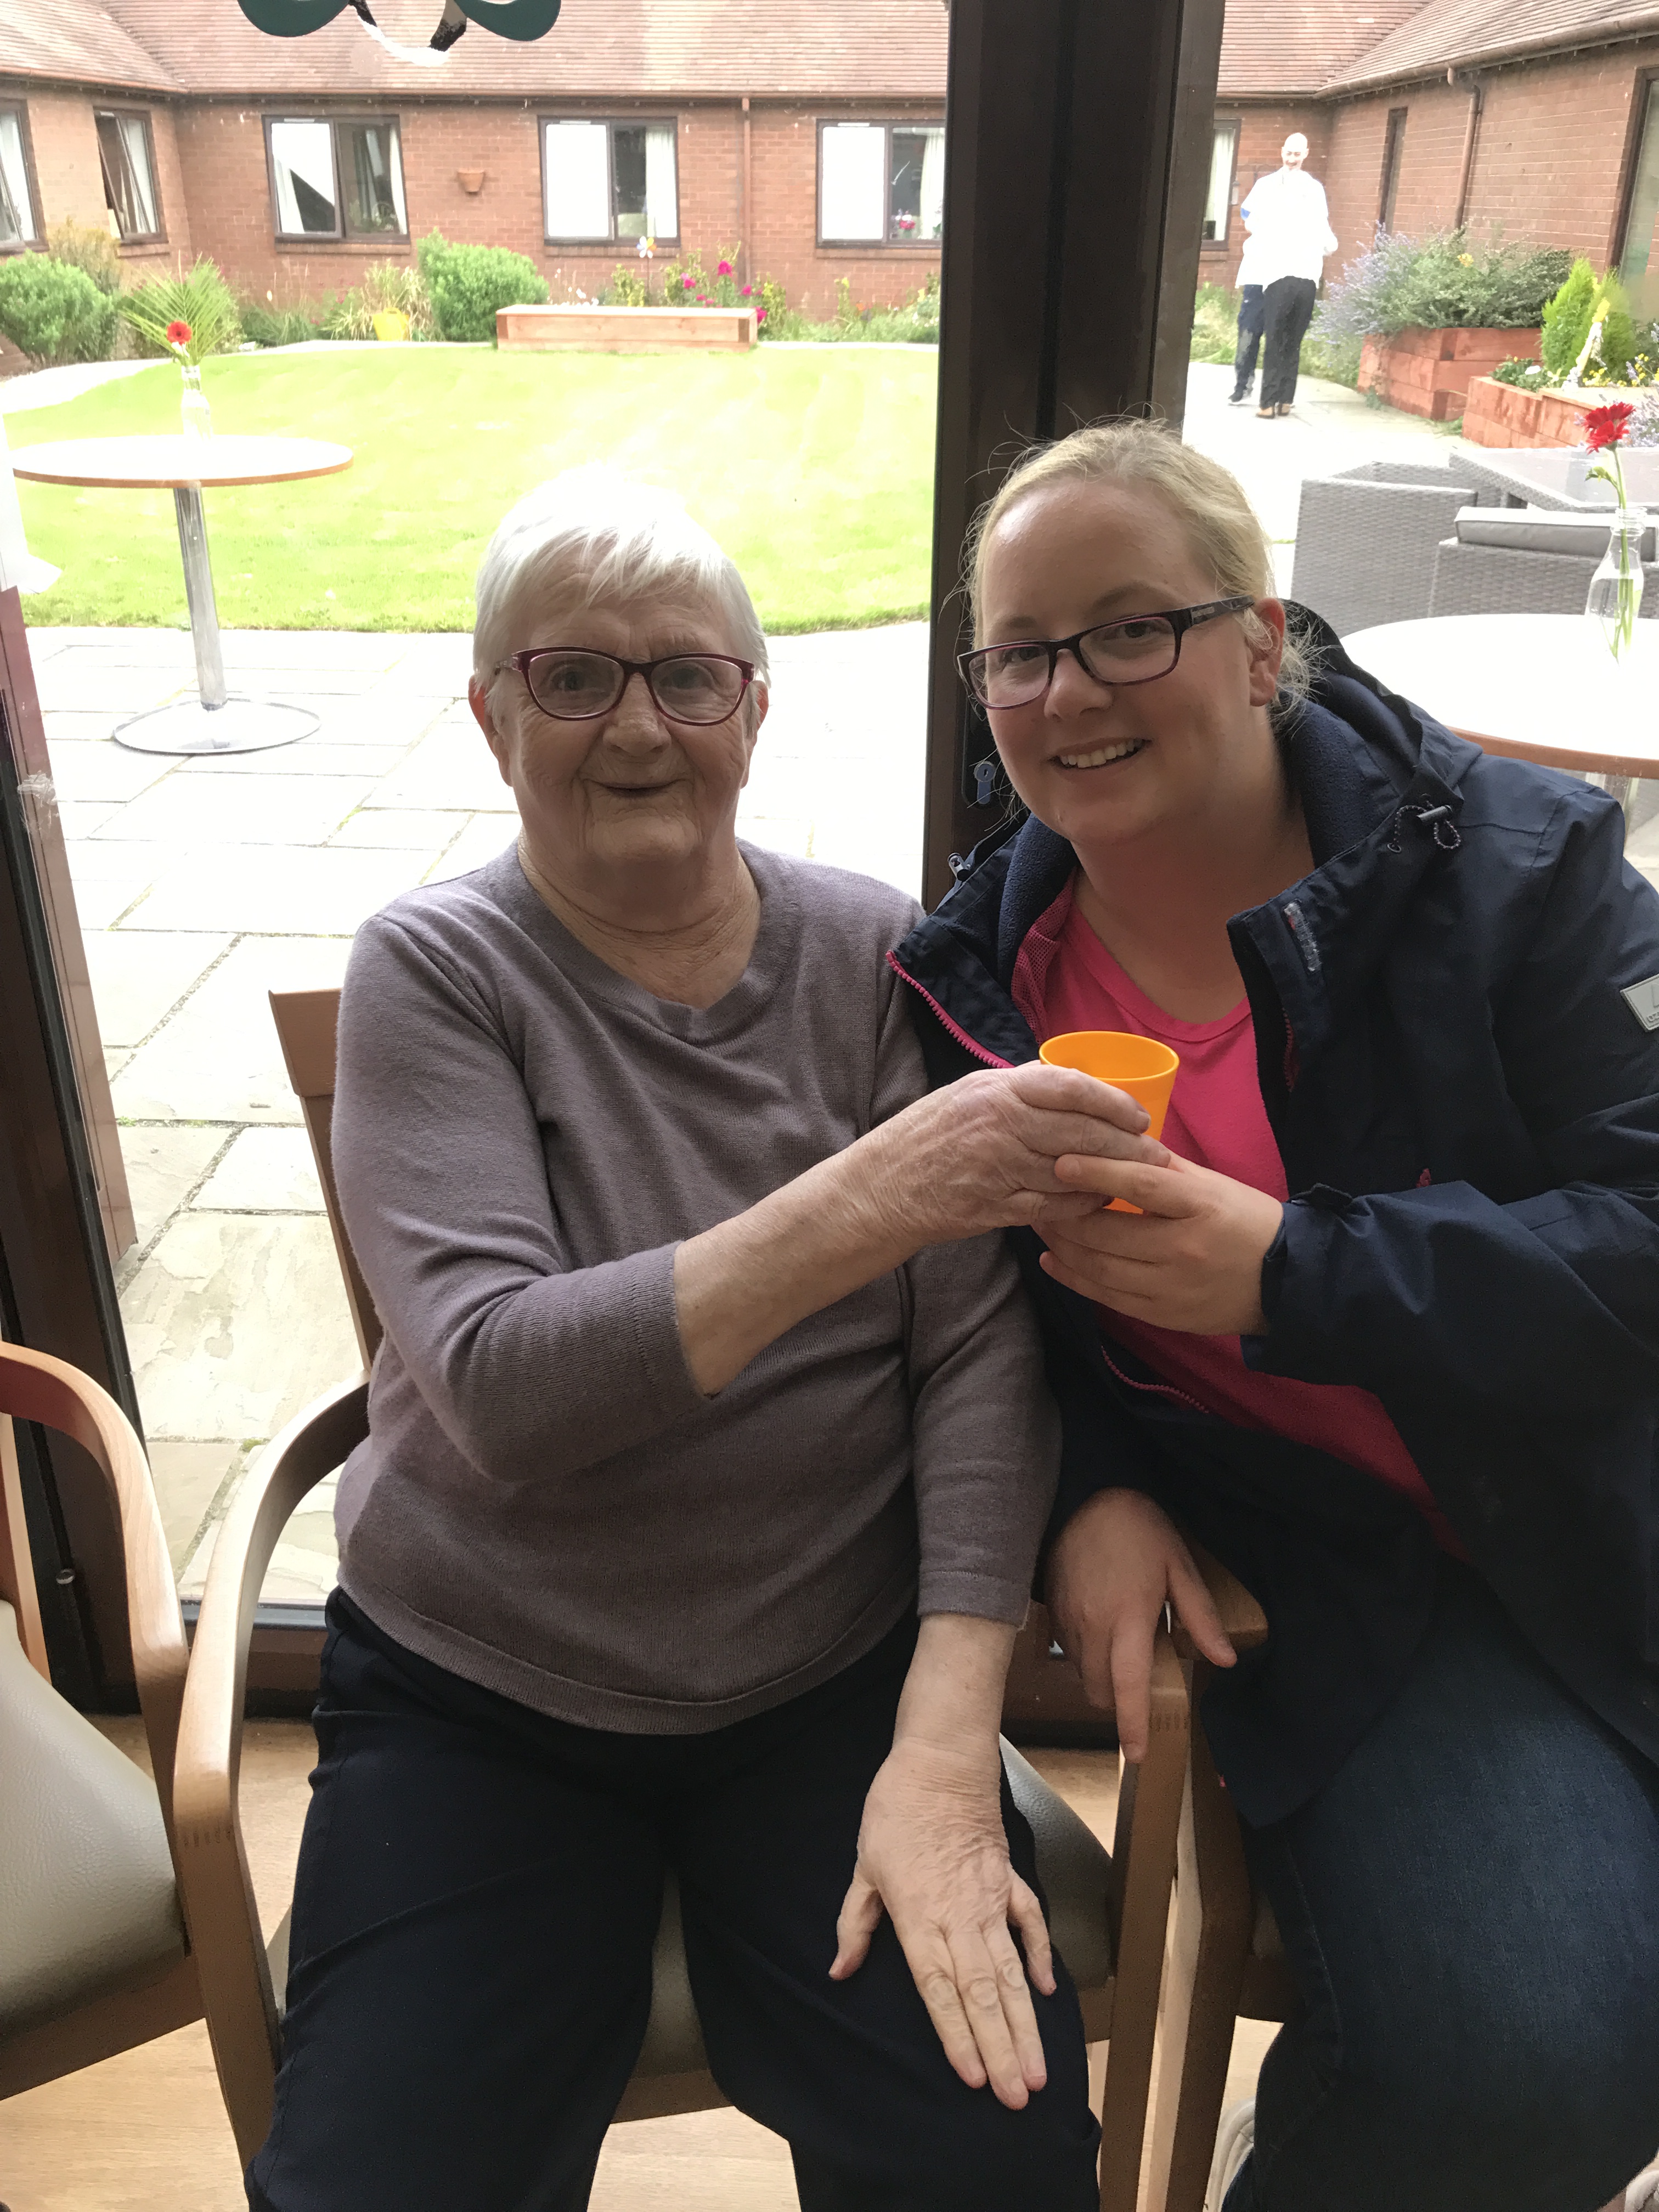 Grace Court Party Aug 17: Key Healthcare is dedicated to caring for elderly residents in safe. We have multiple dementia care homes including our care home middlesbrough, our care home St. Helen and care home saltburn. We excel in monitoring and improving care levels.